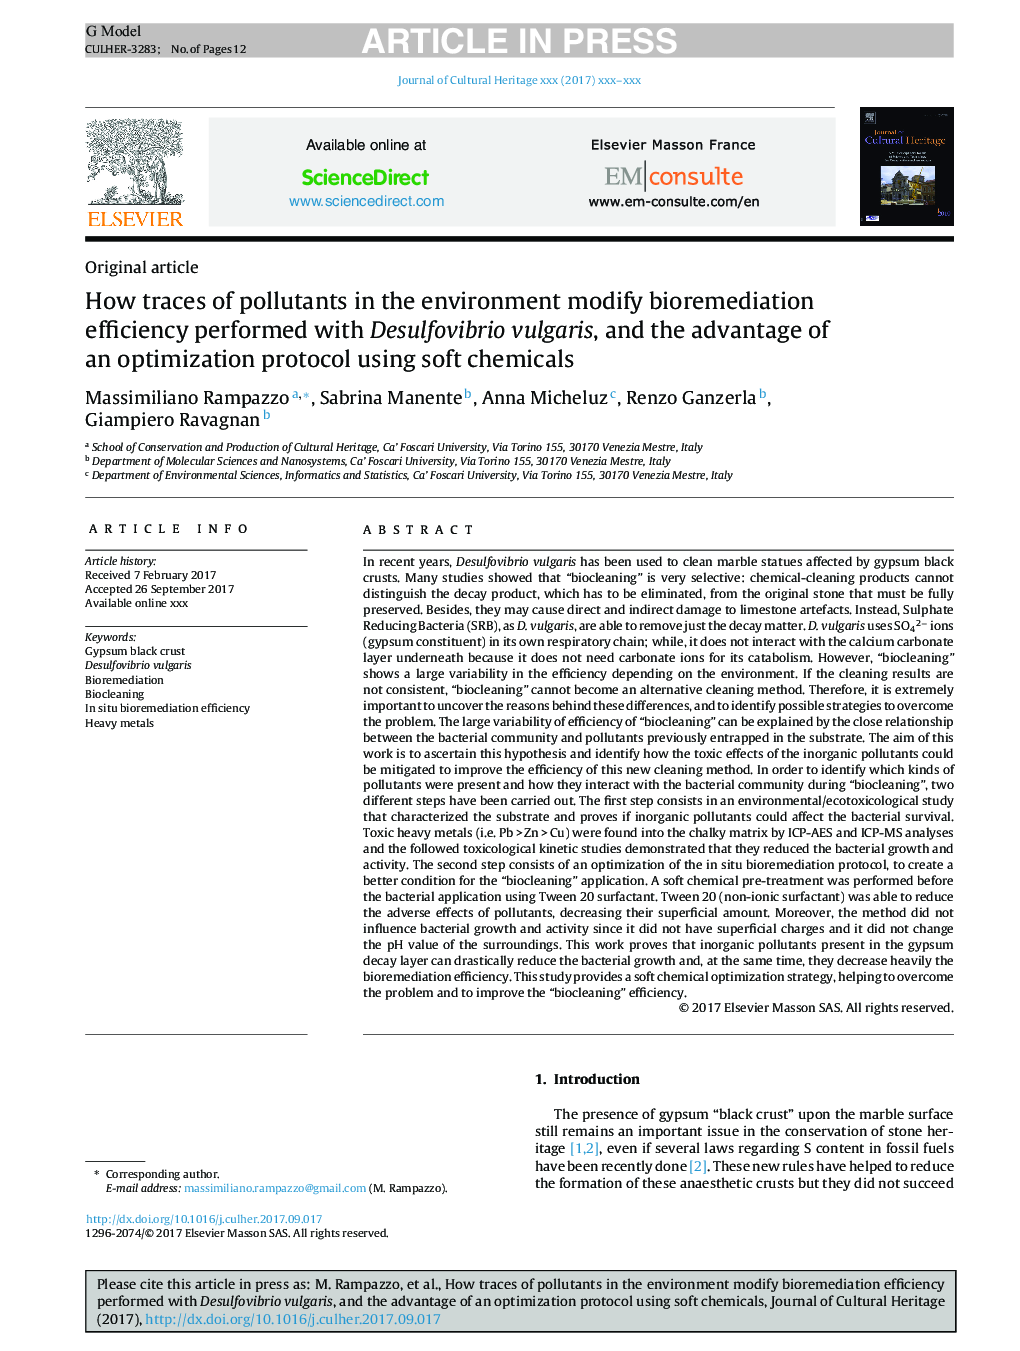 How traces of pollutants in the environment modify bioremediation efficiency performed with Desulfovibrio vulgaris, and the advantage of an optimization protocol using soft chemicals